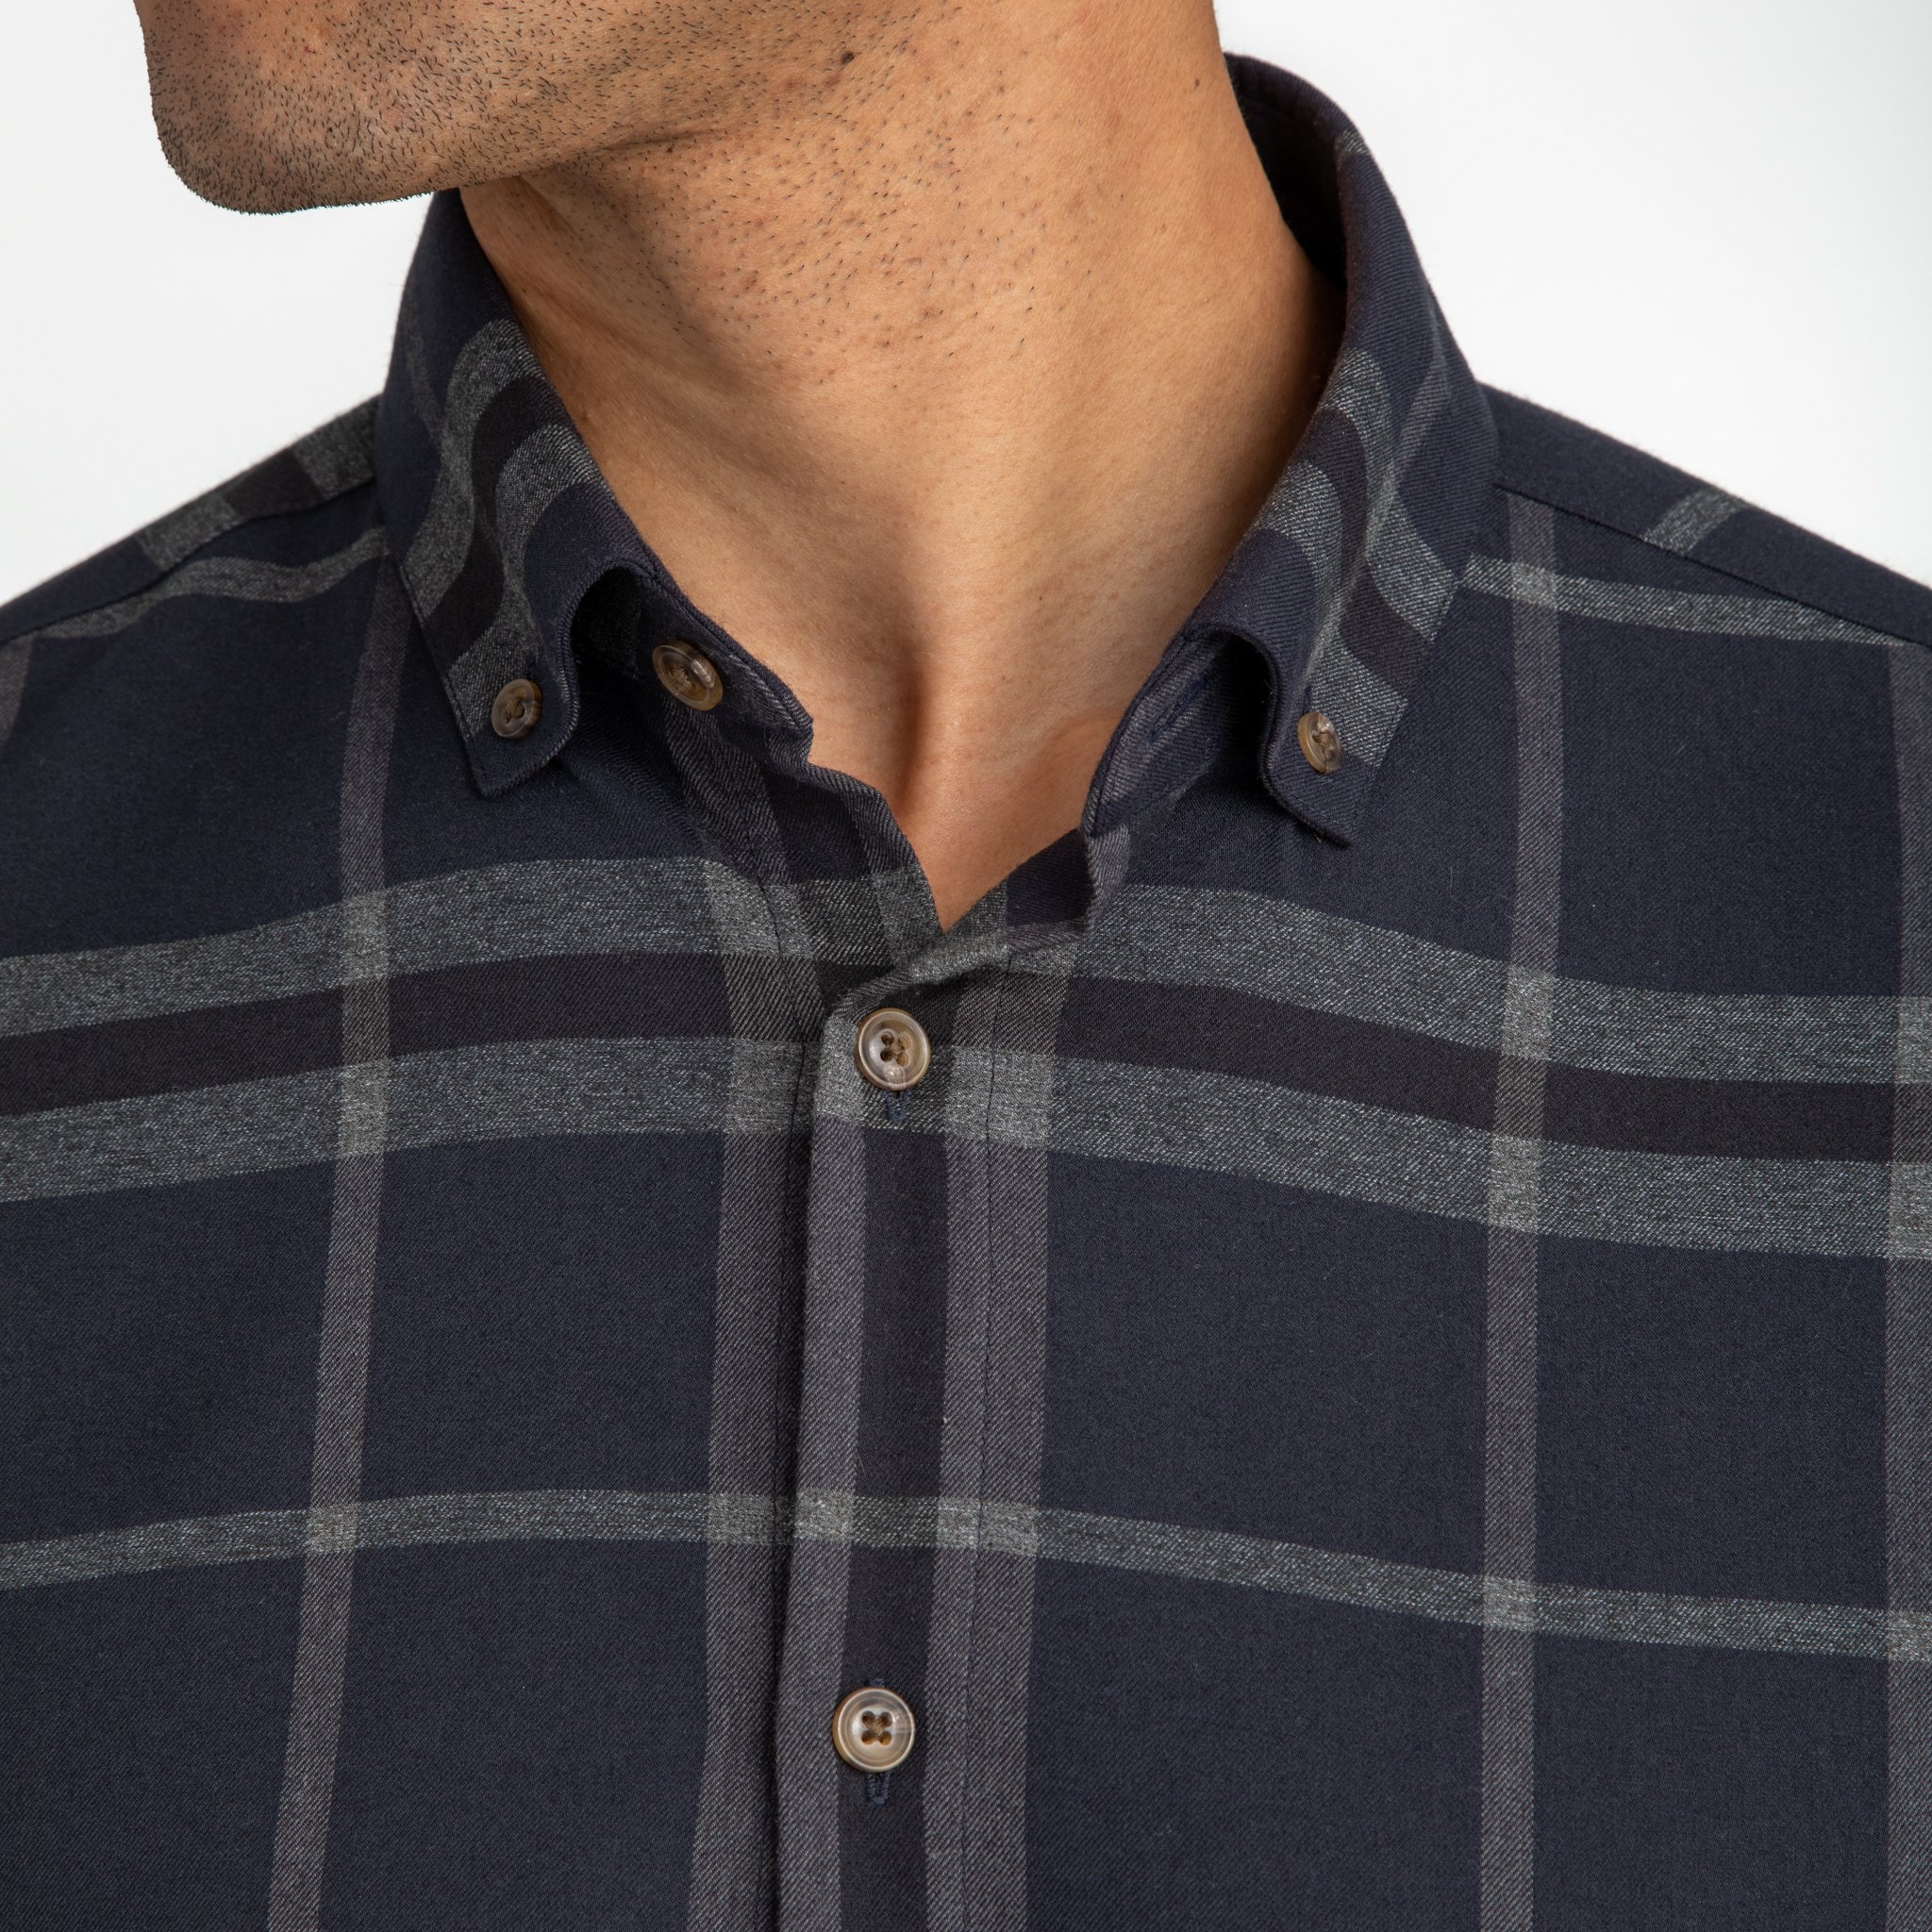 Mizzen+Main's Performance Flannels Are The Perfect Holiday Gift - BroBible